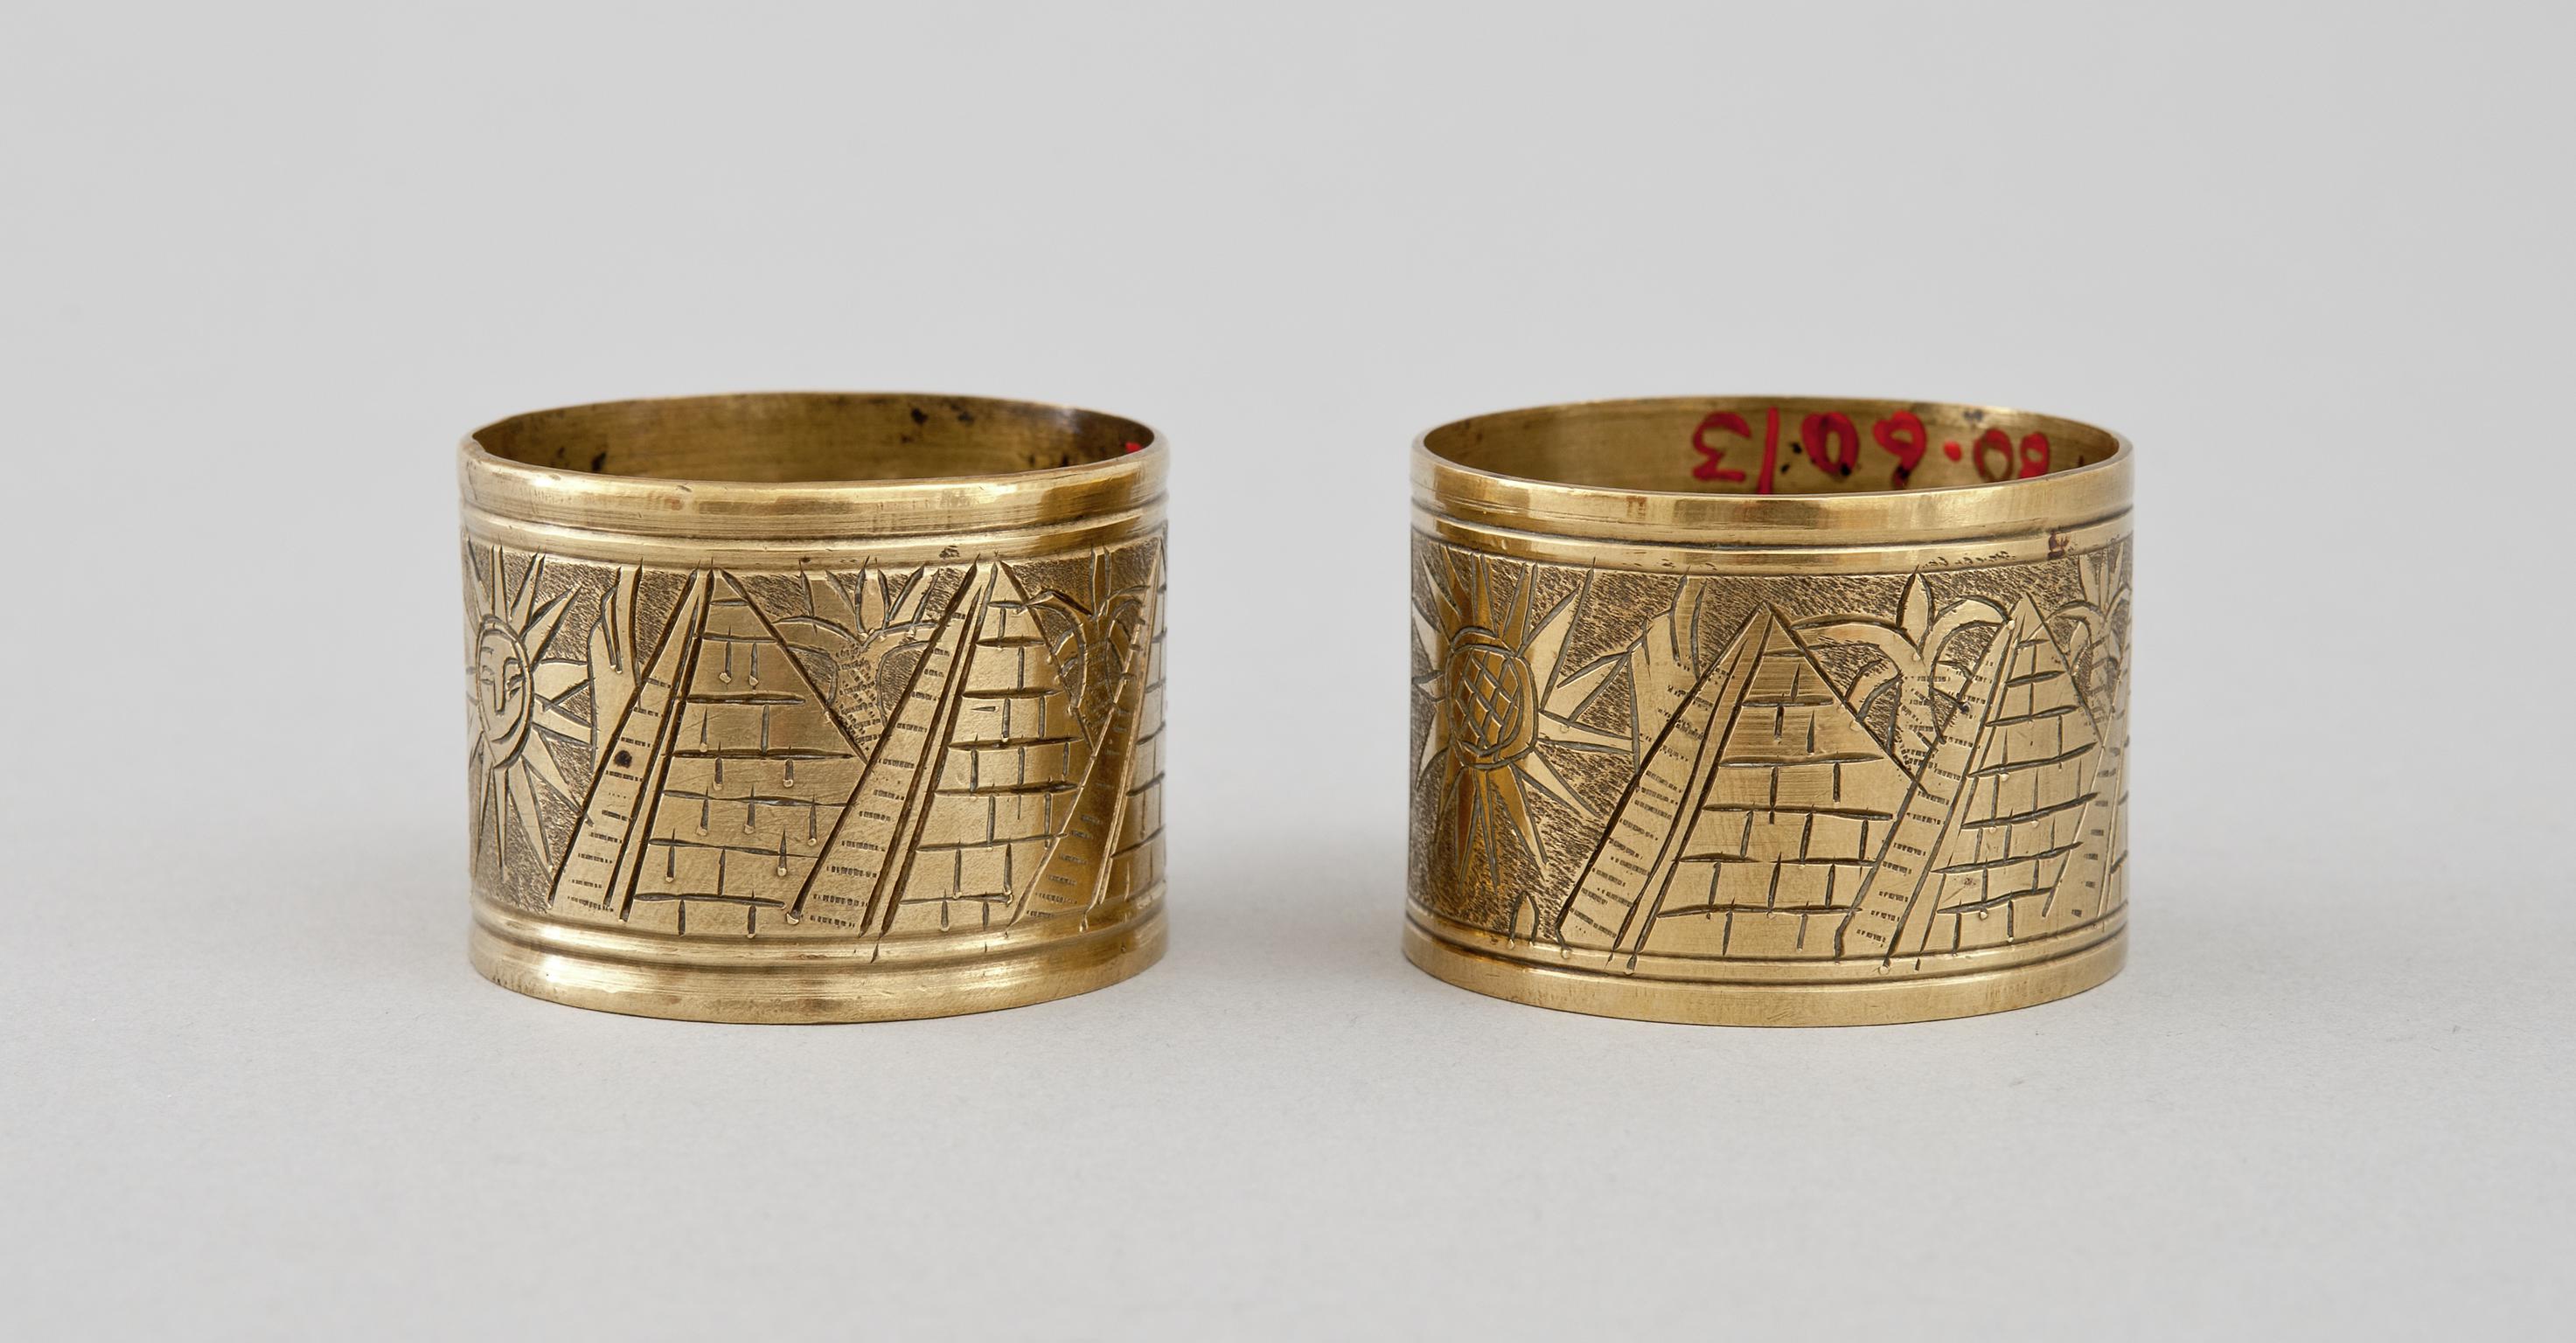 Brass napkin ring made from a shell case. Engraved with Egyptian motifs of pyramids and sphinx.